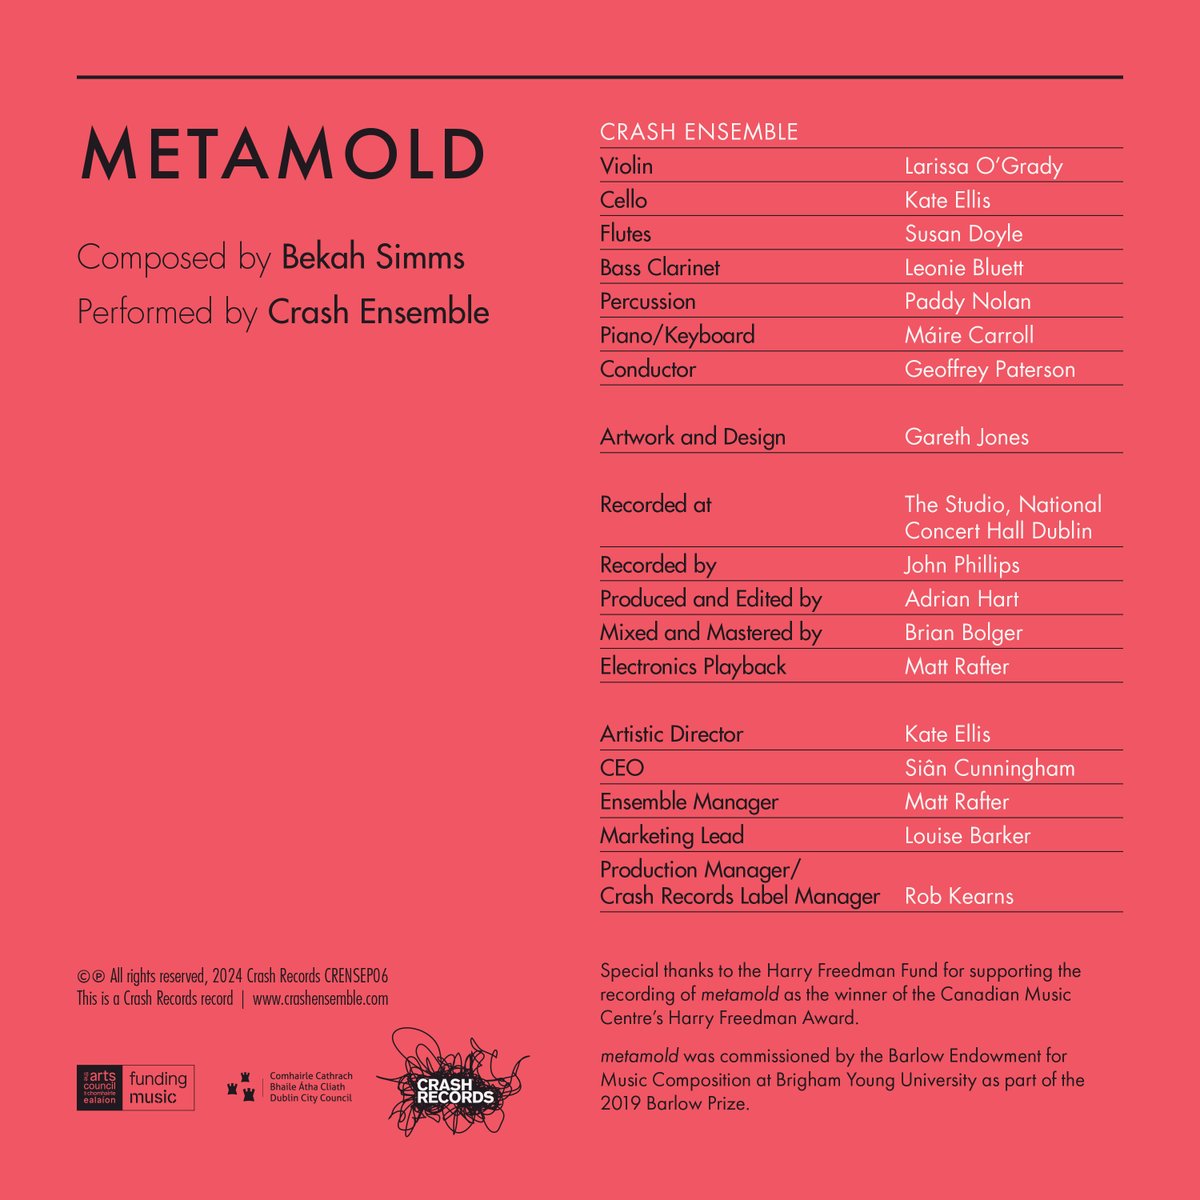 It's #BandcampFriday🎈 Crash Ensemble + @bekahsimms will release 'metamold' May 17th. This delightfully genre-avoidant work revels in groovy vintage microtonal keyboard riffs as much as it does amorphous resonant noisescapes. Pre-order today: crashensemble.bandcamp.com/album/metamold